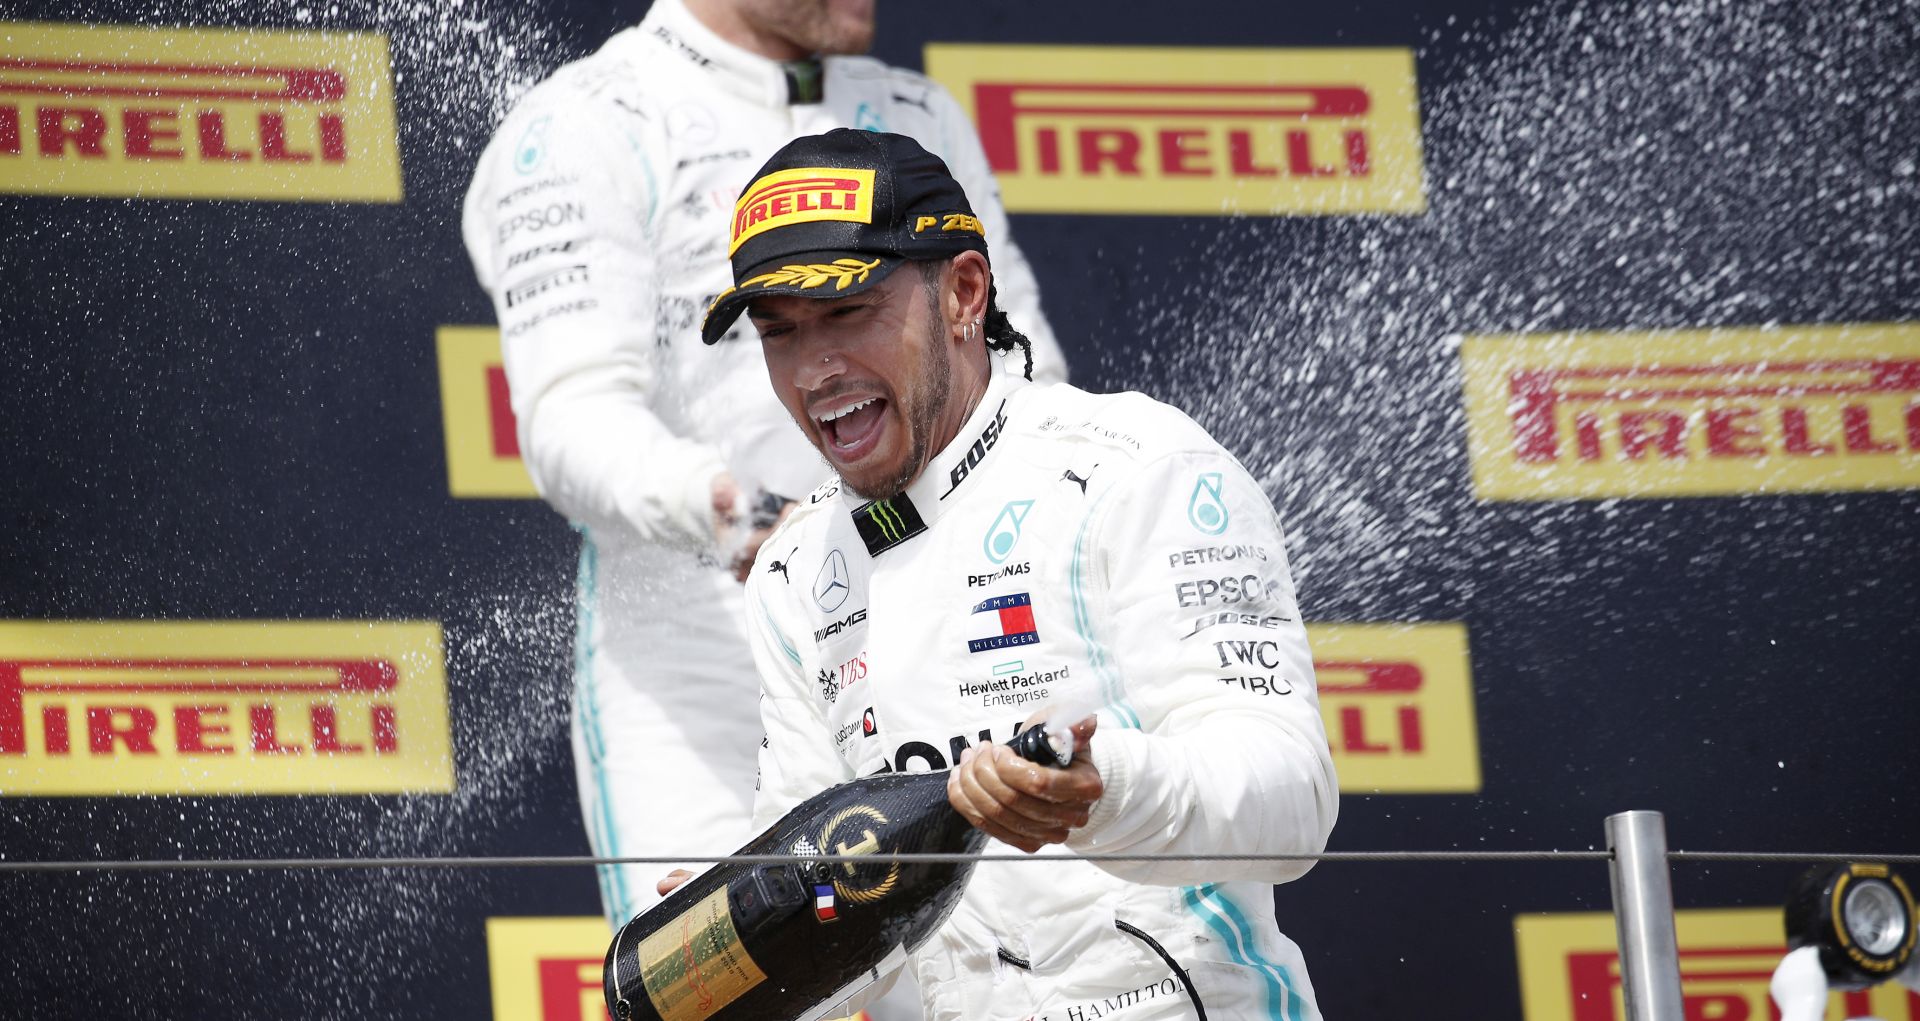 epa07668451 British Formula One driver Lewis Hamilton (front) of Mercedes AMG GP celebrates with his second placed Finnish teammate Valtteri Bottas (back) on the podium after winning the 2019 French Formula One Grand Prix at Paul Ricard circuit in Le Castellet, France, 23 June 2019.  EPA/YOAN VALAT